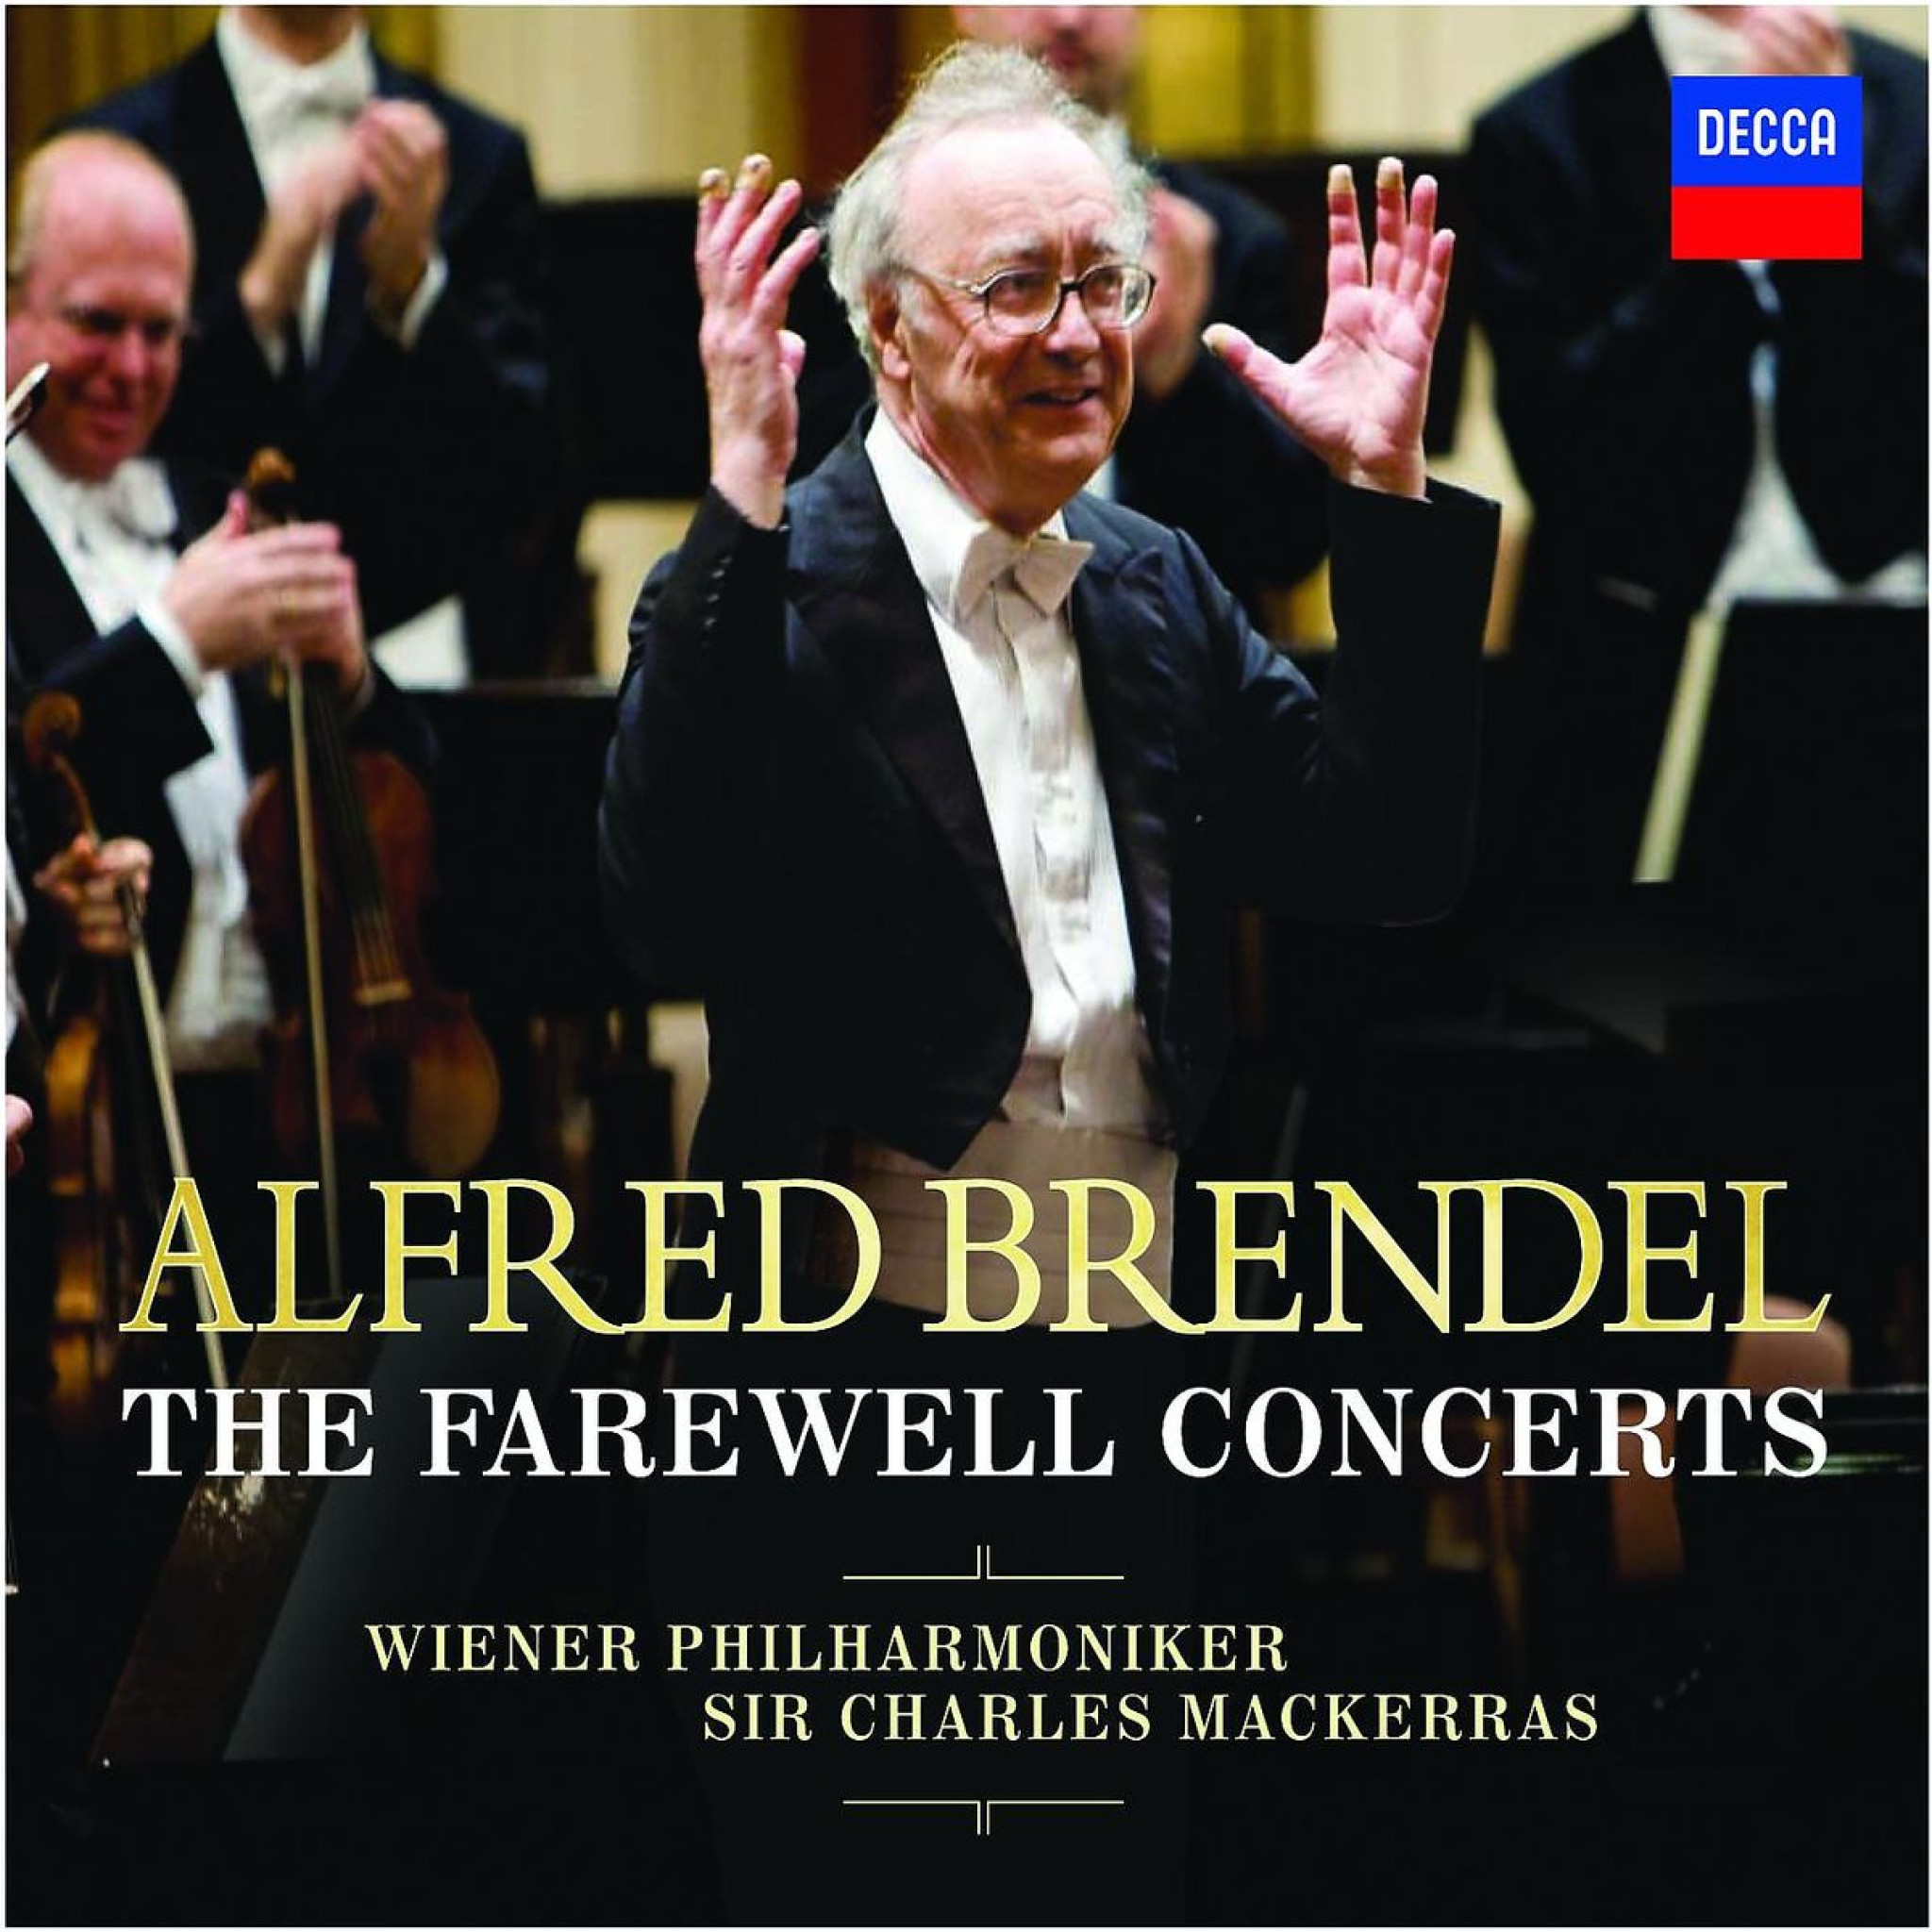 ALFRED BRENDEL The Farewell Concert